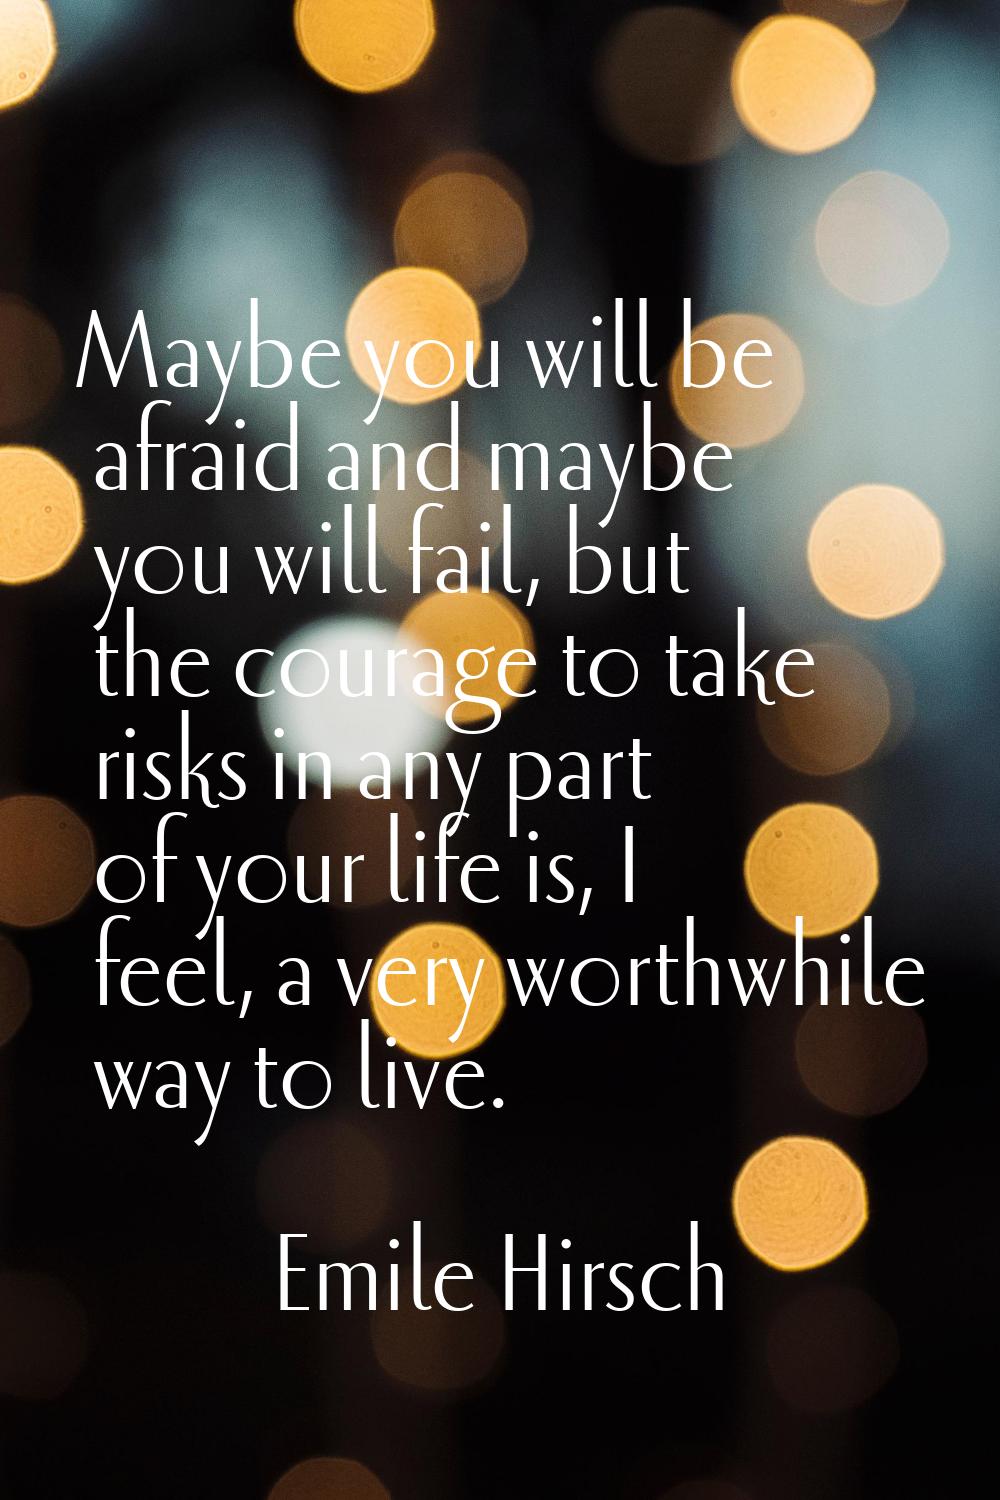 Maybe you will be afraid and maybe you will fail, but the courage to take risks in any part of your